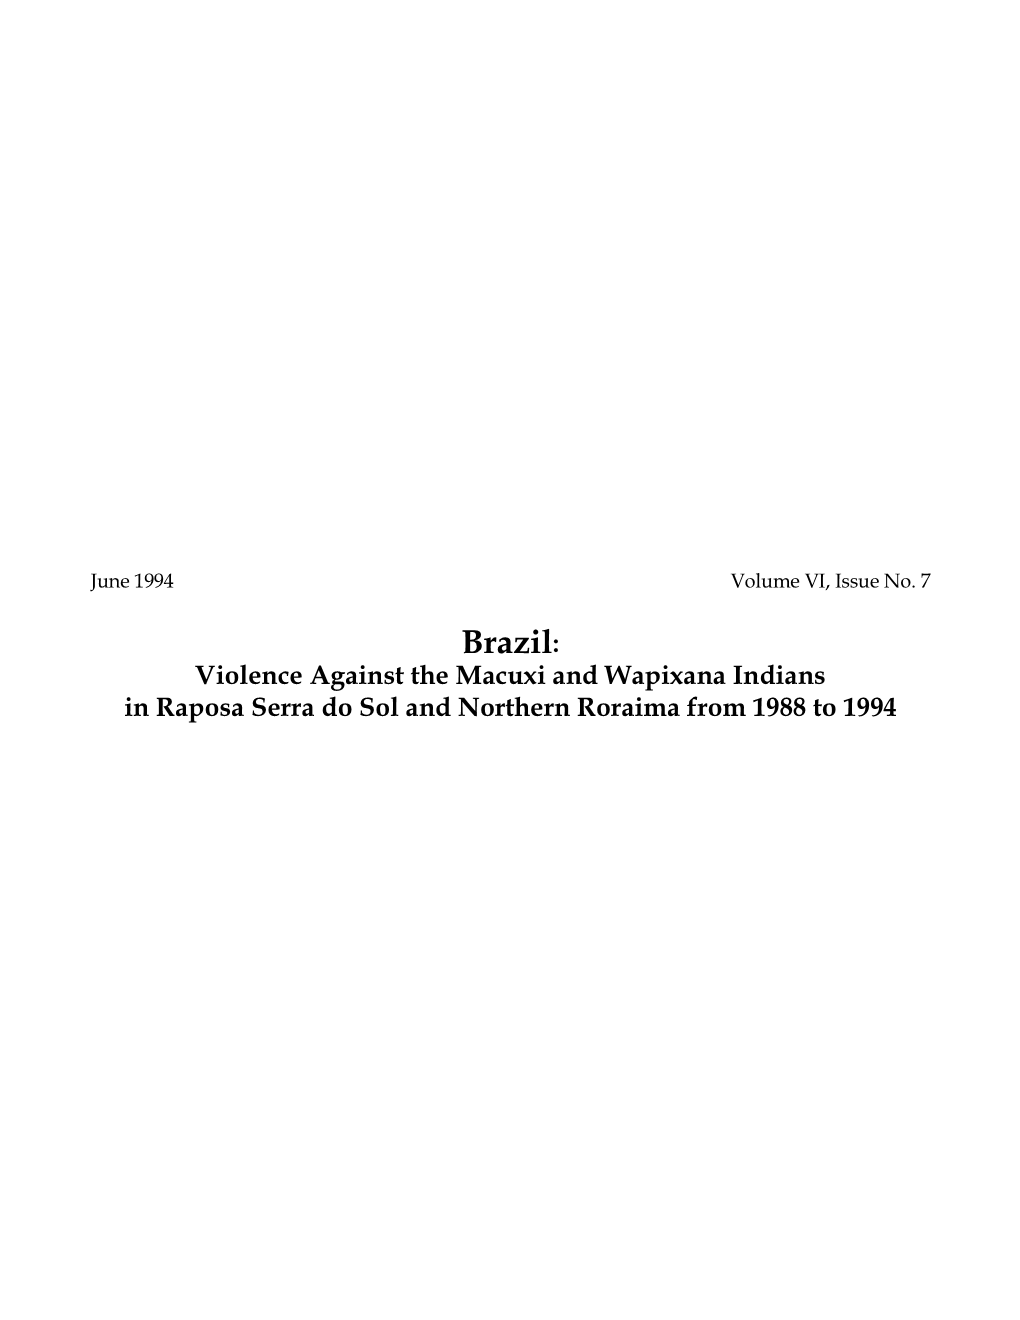 Brazil: Violence Against the Macuxi and Wapixana Indians in Raposa Serra Do Sol and Northern Roraima from 1988 to 1994